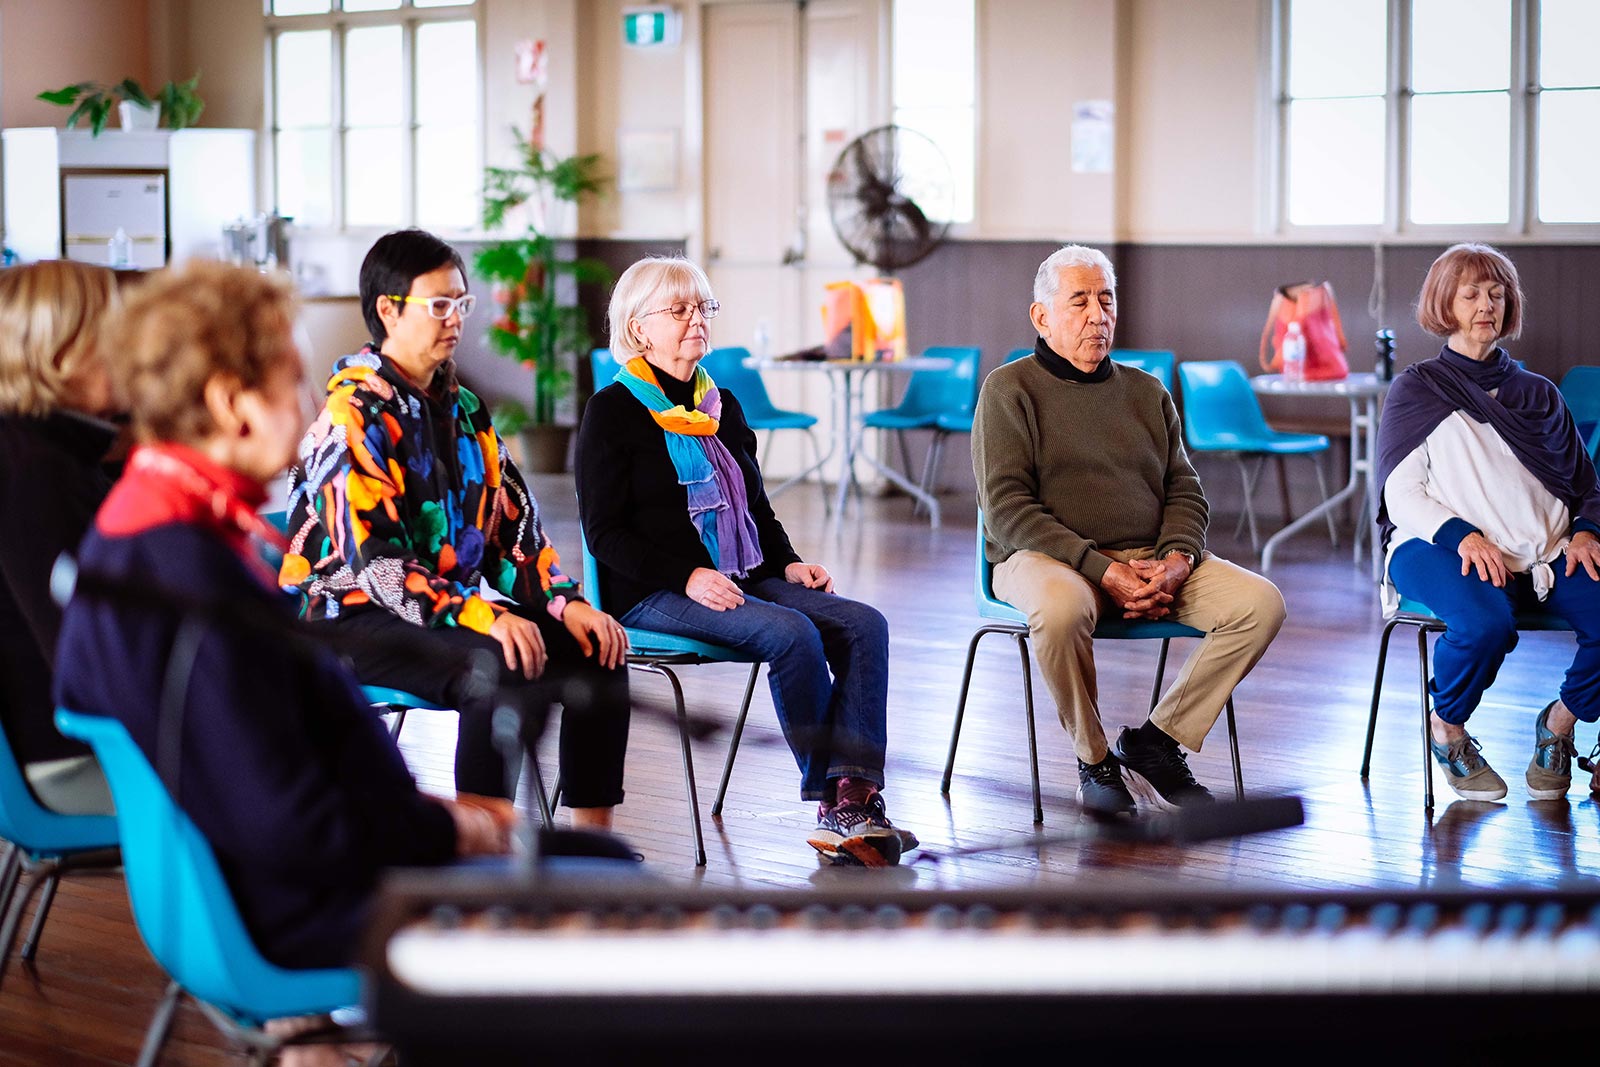 Tree Of Life: Seniors Music And Movement Program | Sounds Across Oceans